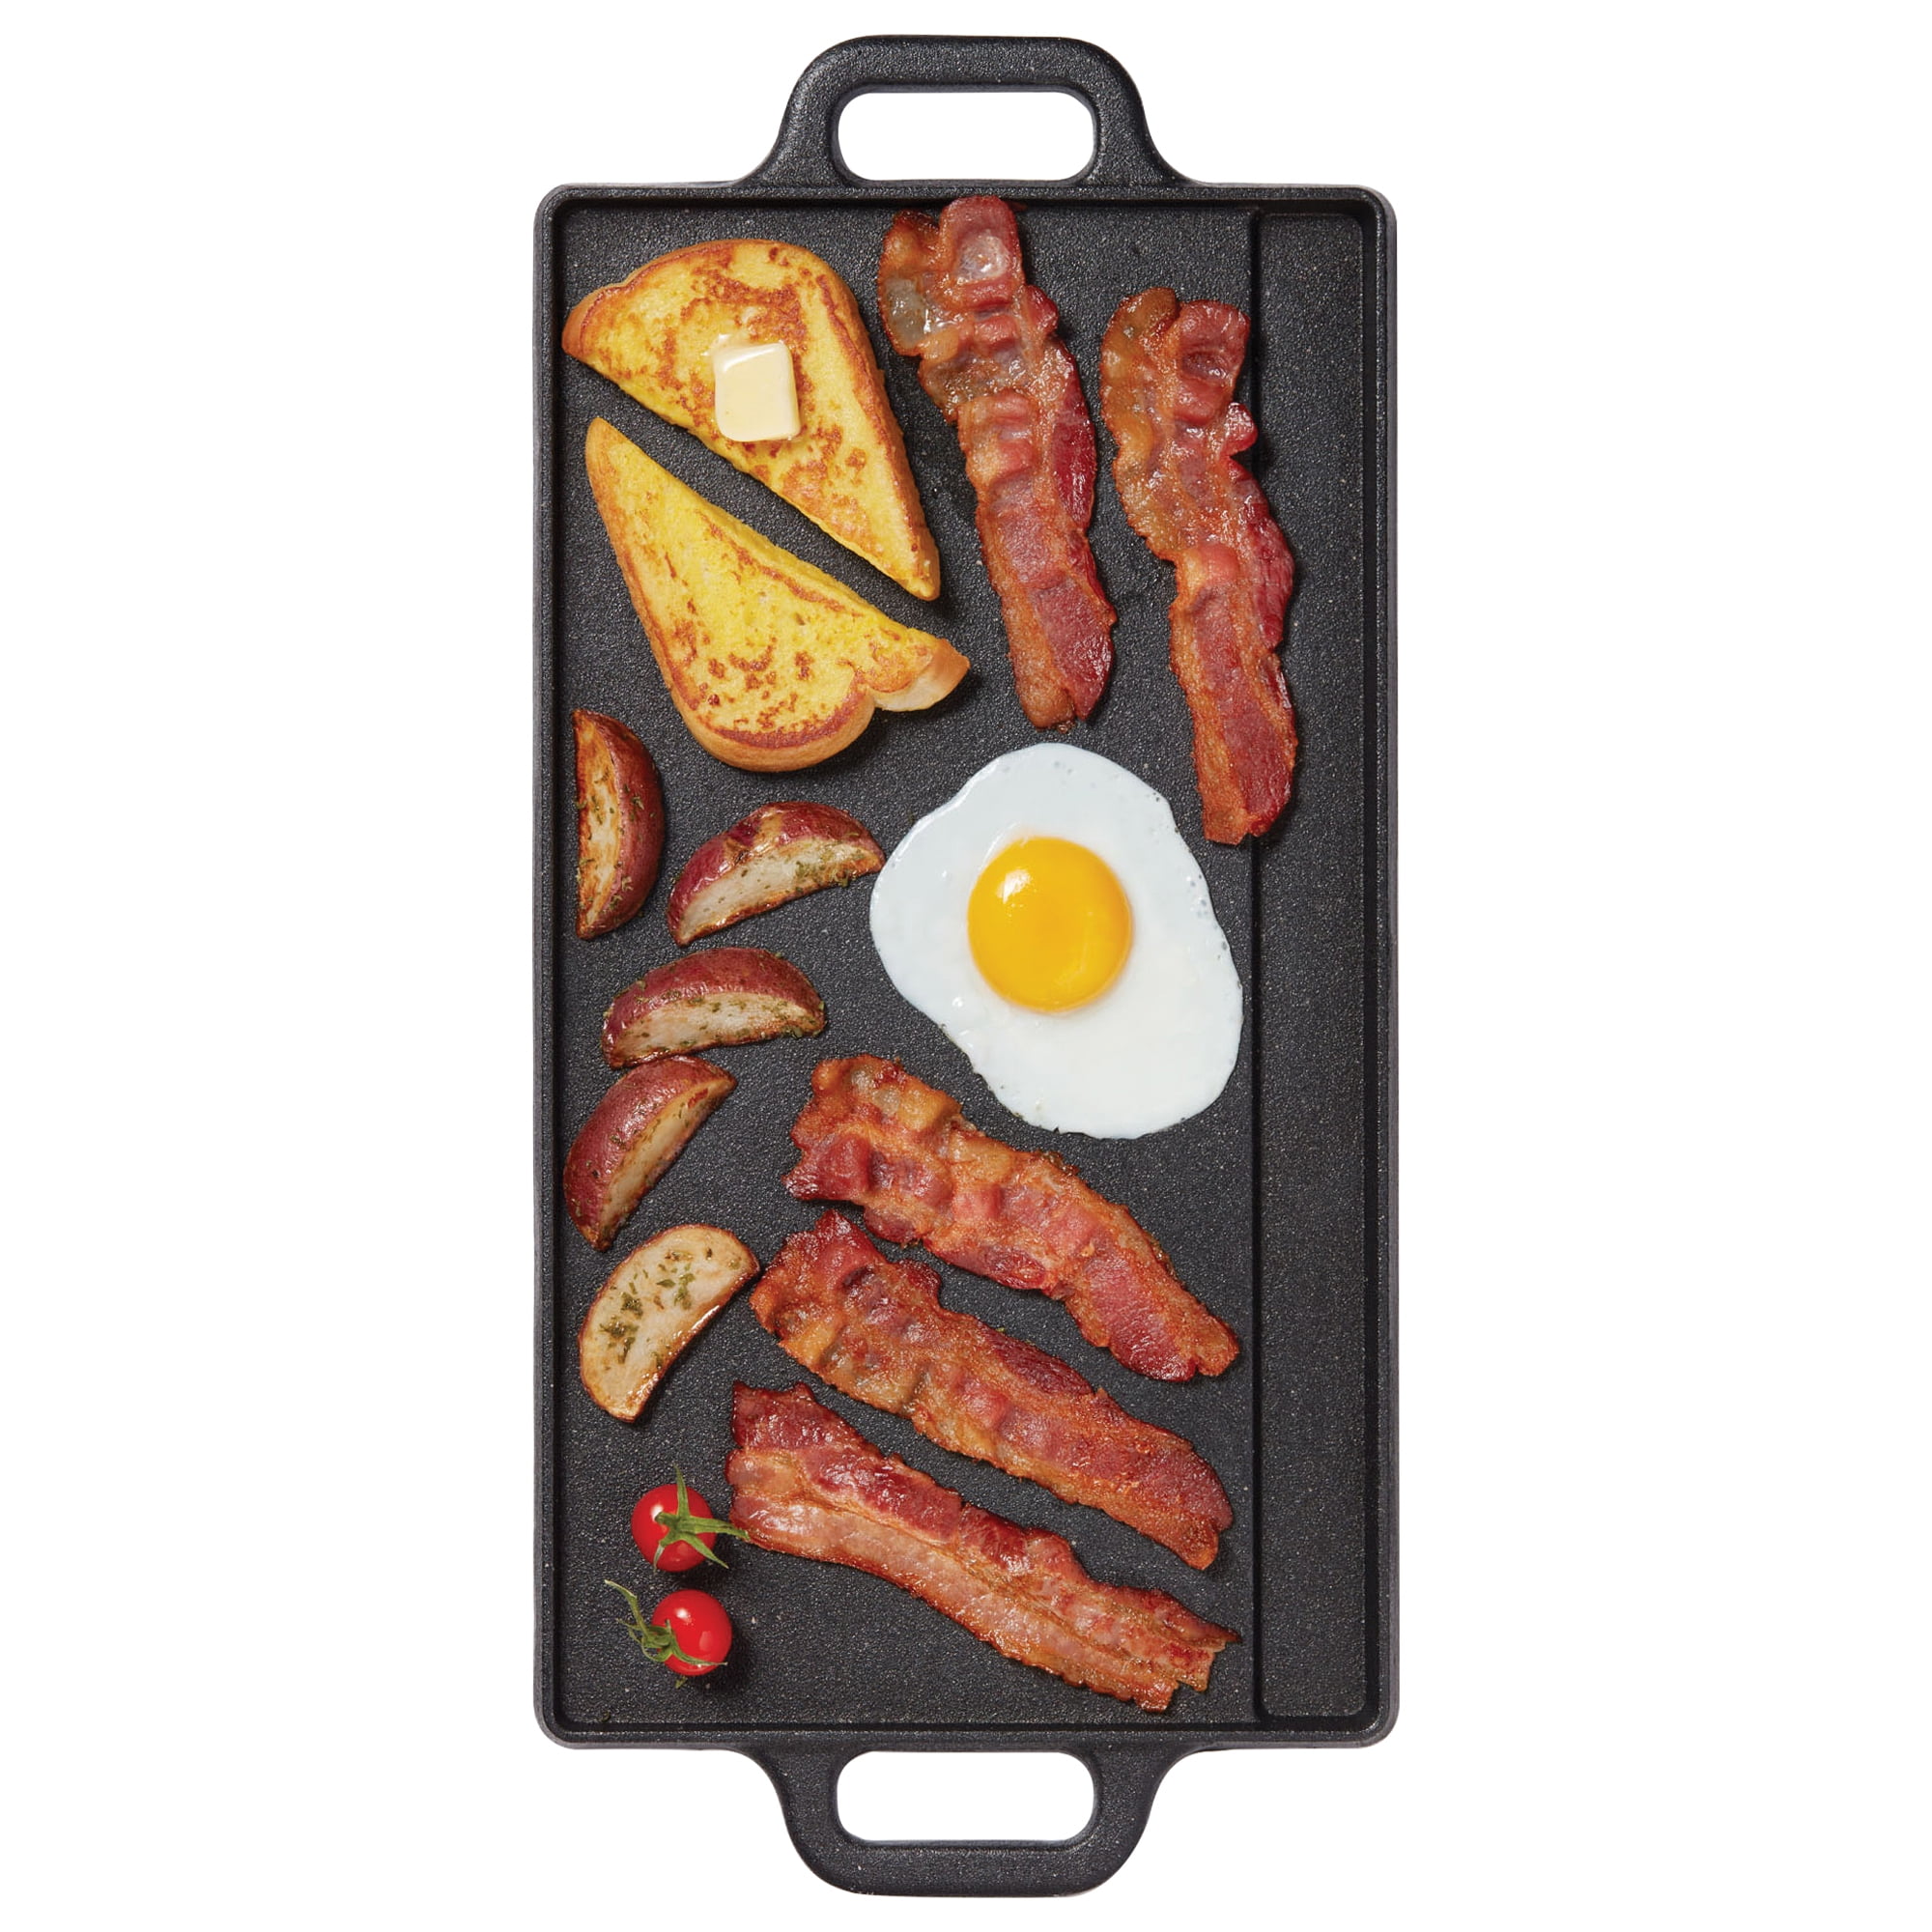 Marquette Castings Reversible Griddle - The BBQ Allstars